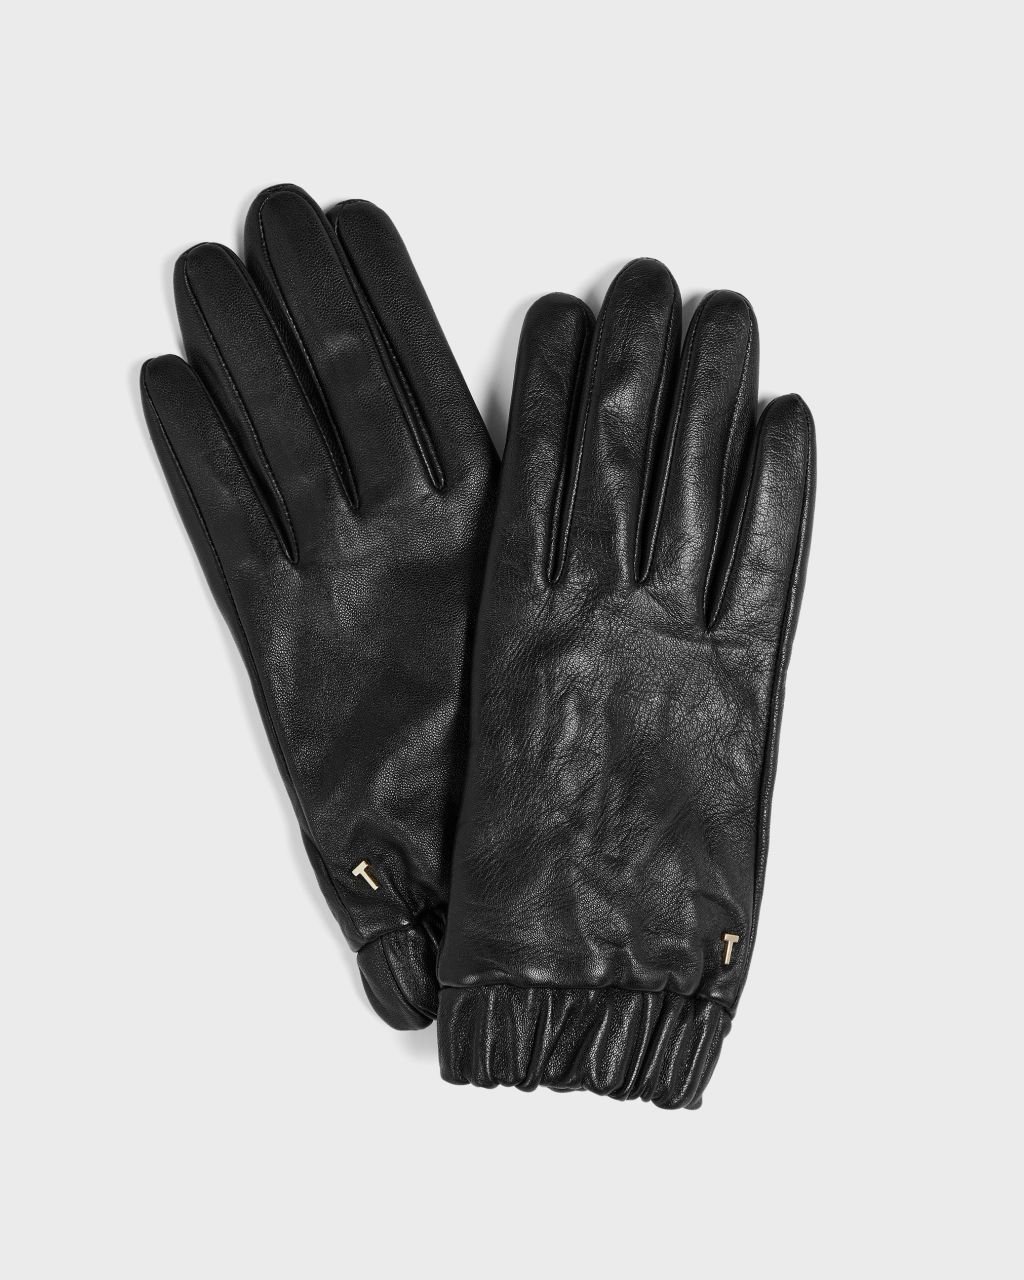 Ted Baker Women's Ruched Cuff Leather Gloves in Black, Emilli